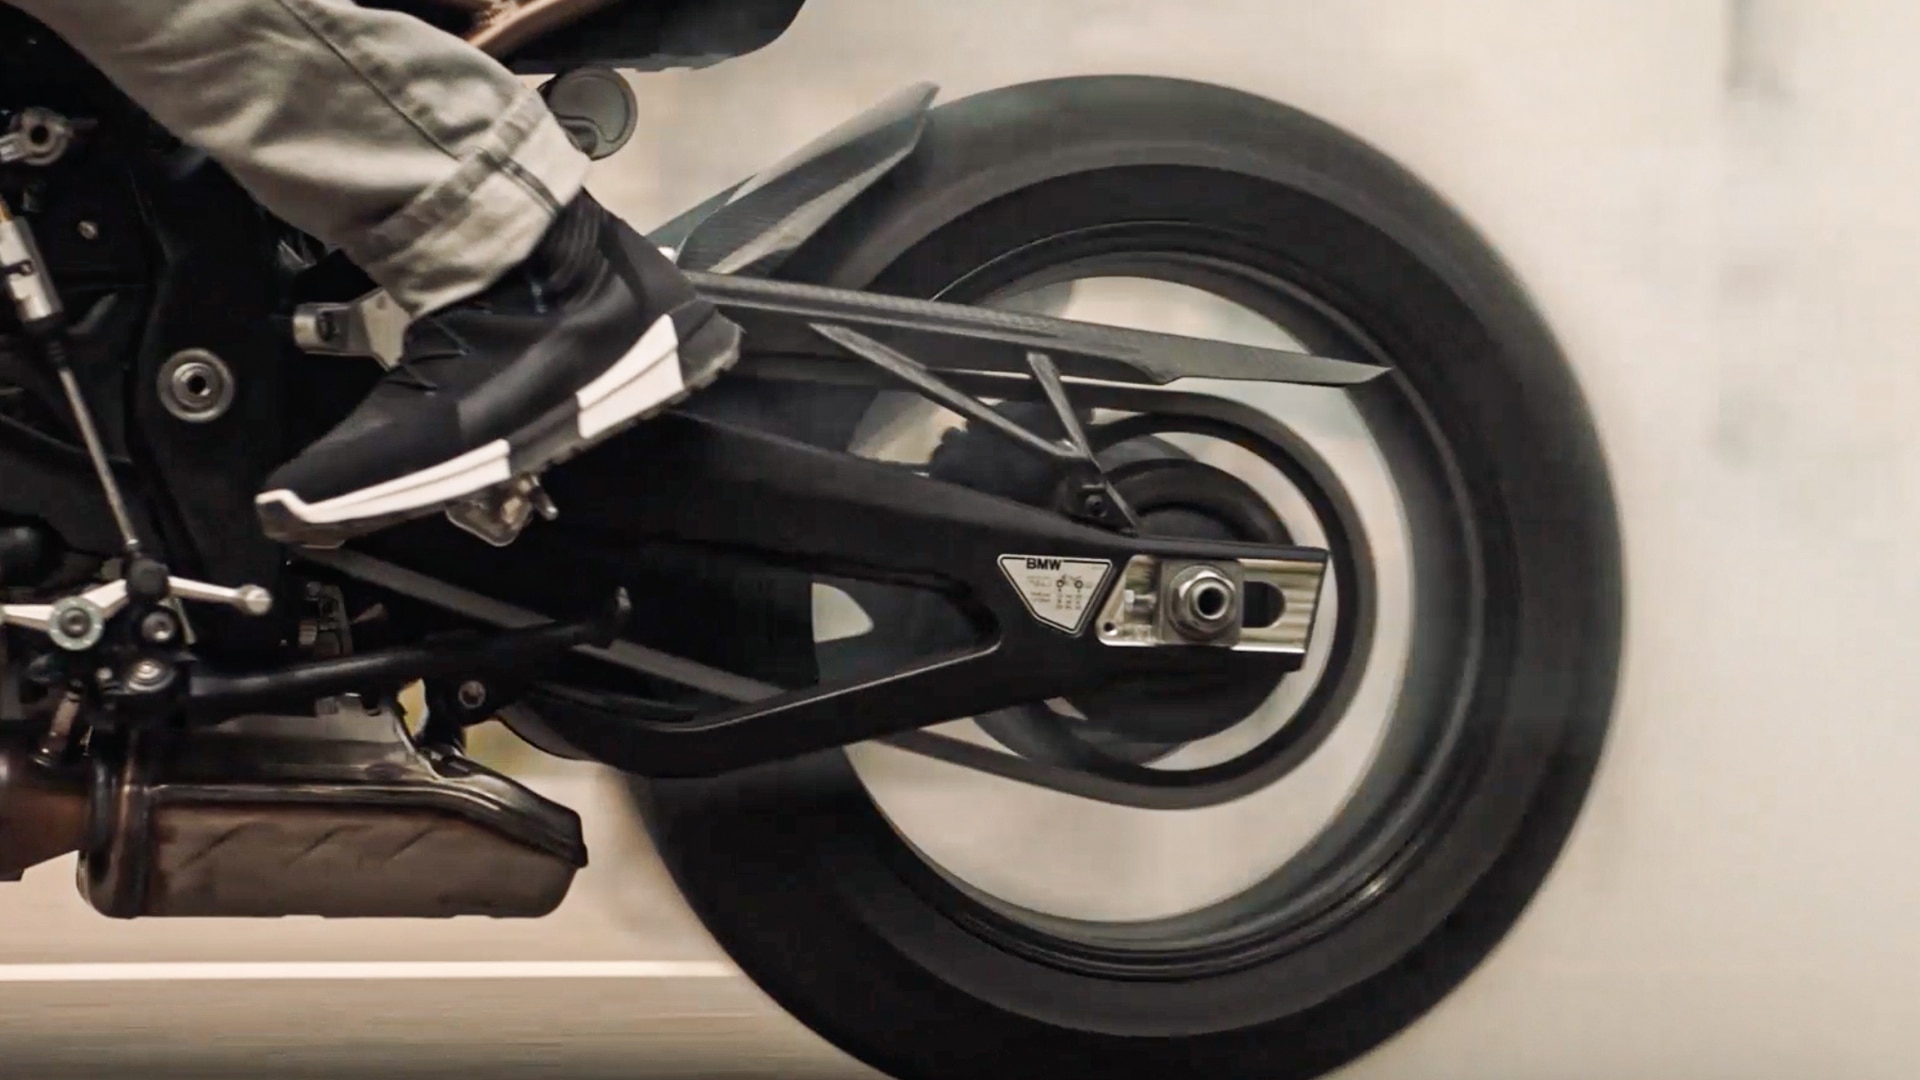 We see a riding sequence of the S 1000 R with spinning tires.